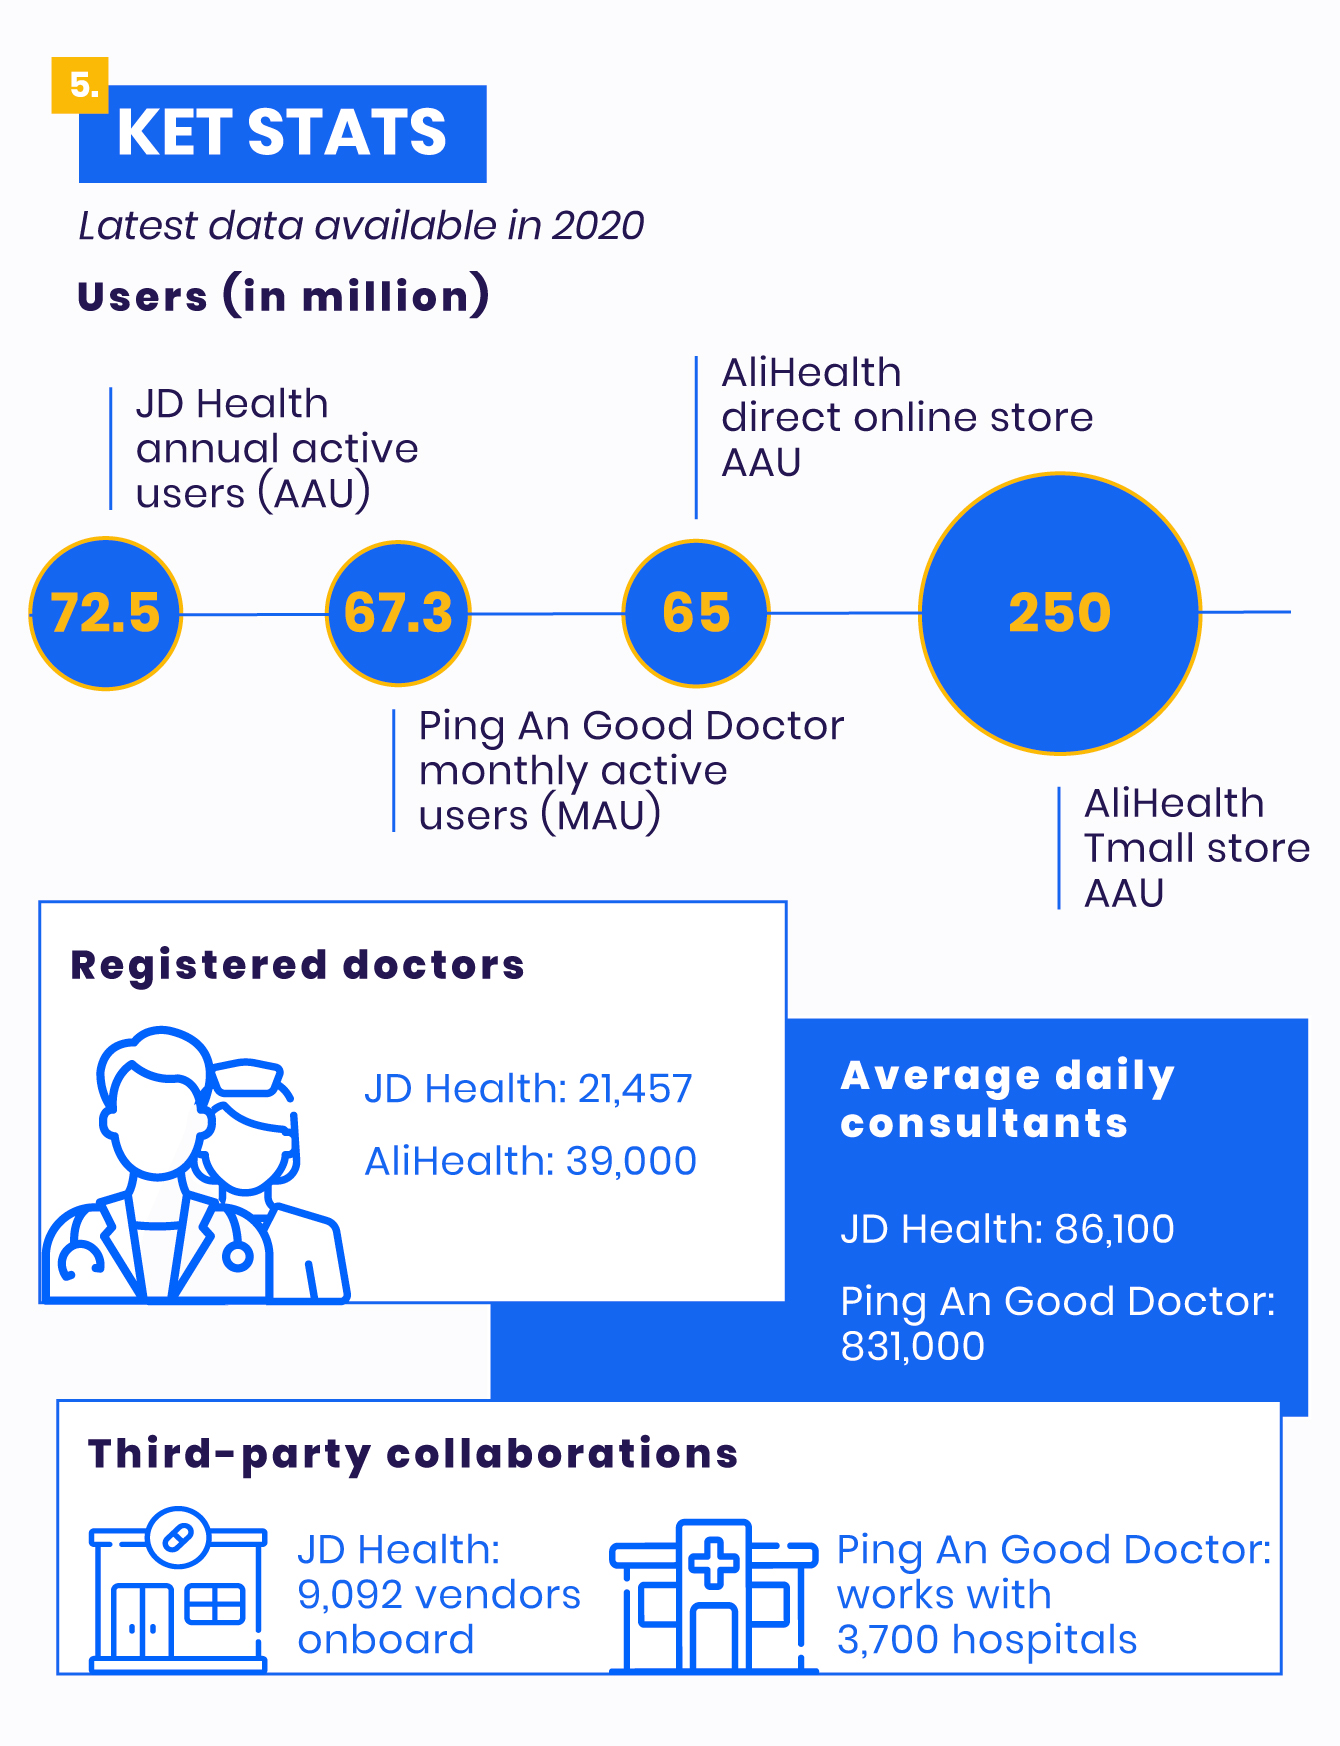 Key stats of JD Health and its peer online healthcare platforms